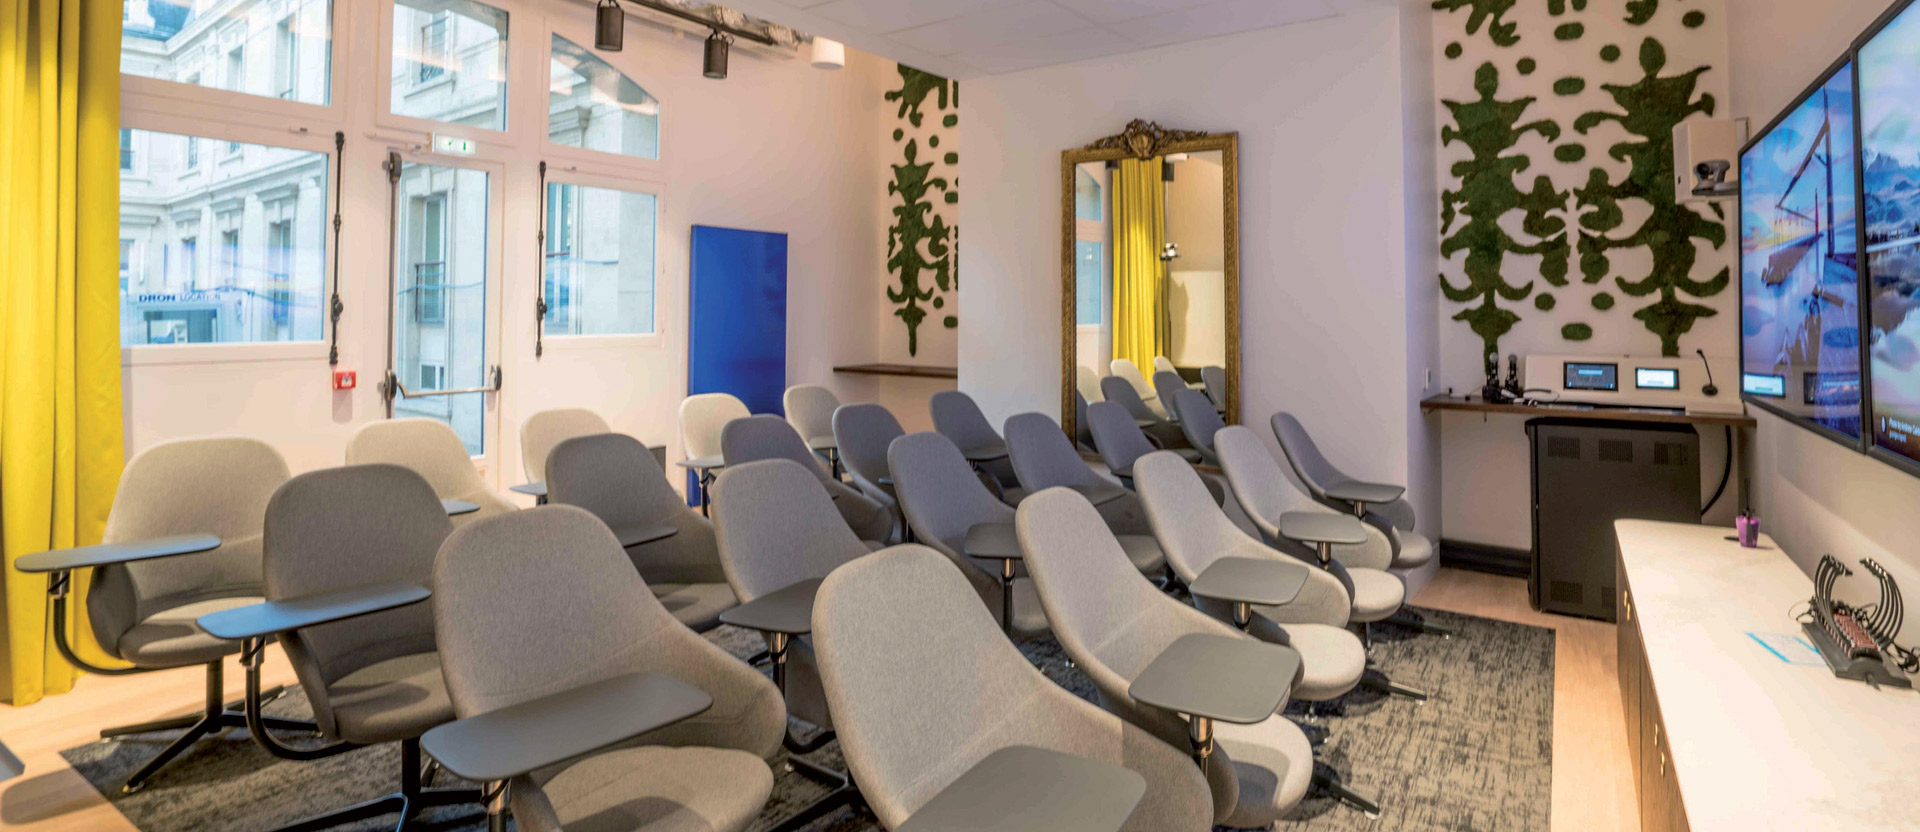 A contemporary meeting room featuring a cascade of ergonomic chairs focused on a large screen; green plant motifs on the walls, yellow accents from a draped curtain, and warm lighting complement the soft gray carpet and white ceiling.